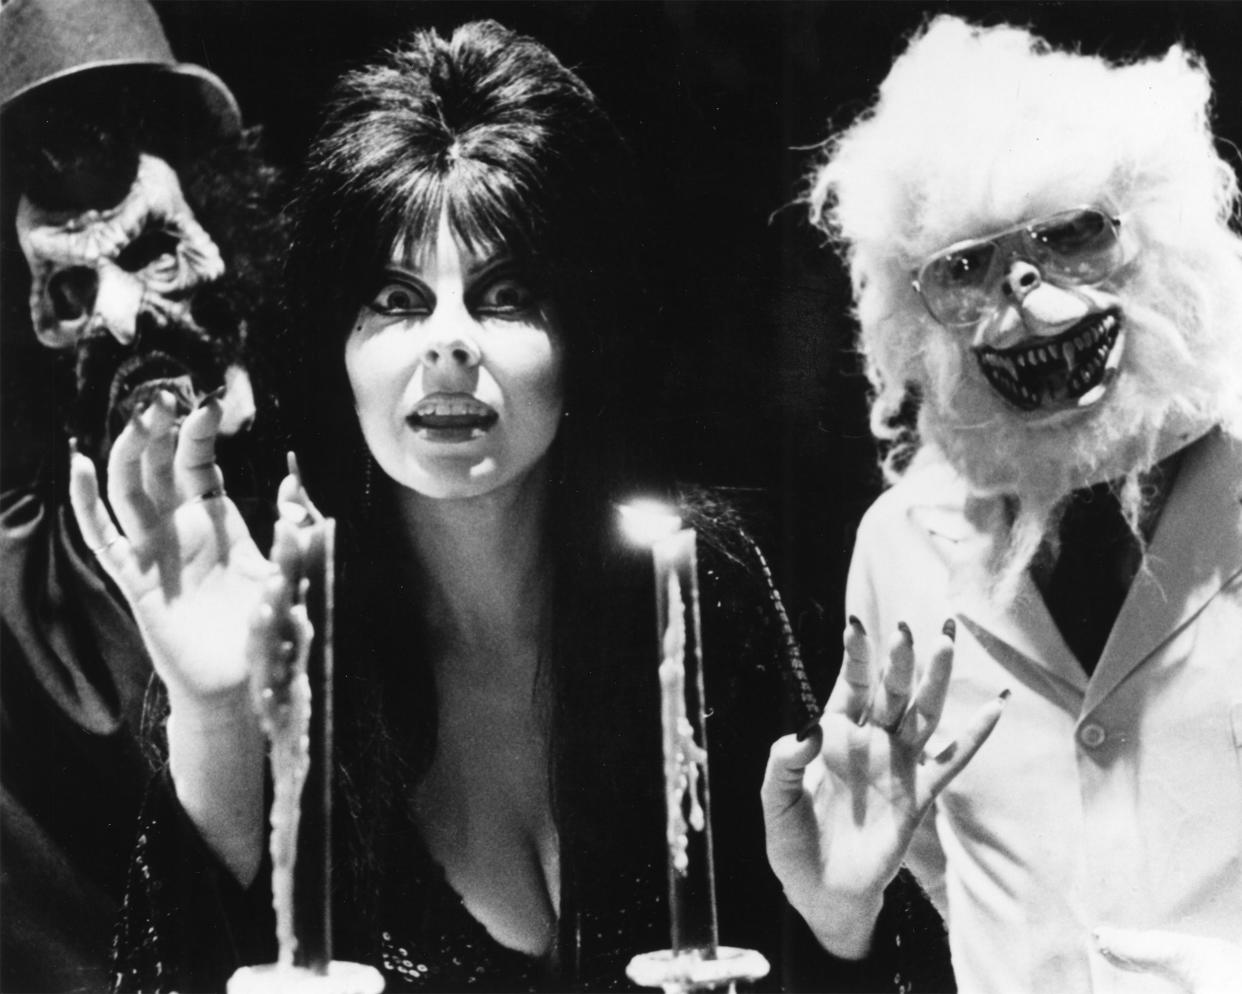 Photo used to promote Elvira's appearances at Knott's Berry Farm's 1986 Halloween Haunt in Buena Park.